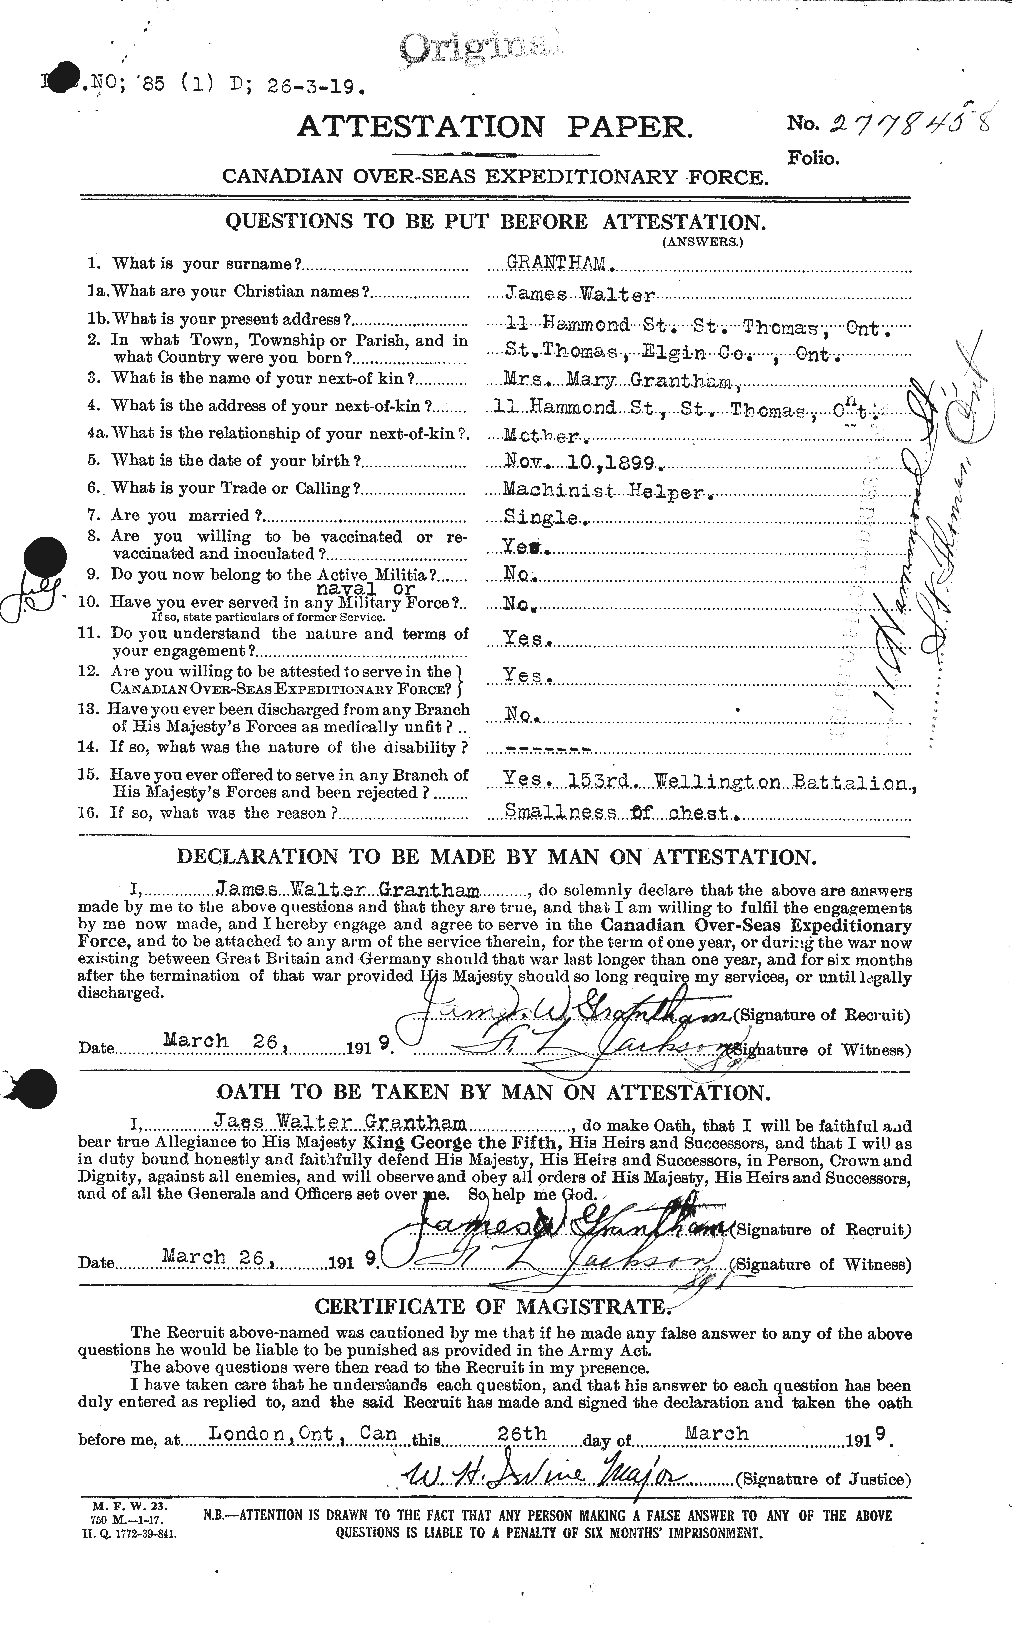 Personnel Records of the First World War - CEF 364413a